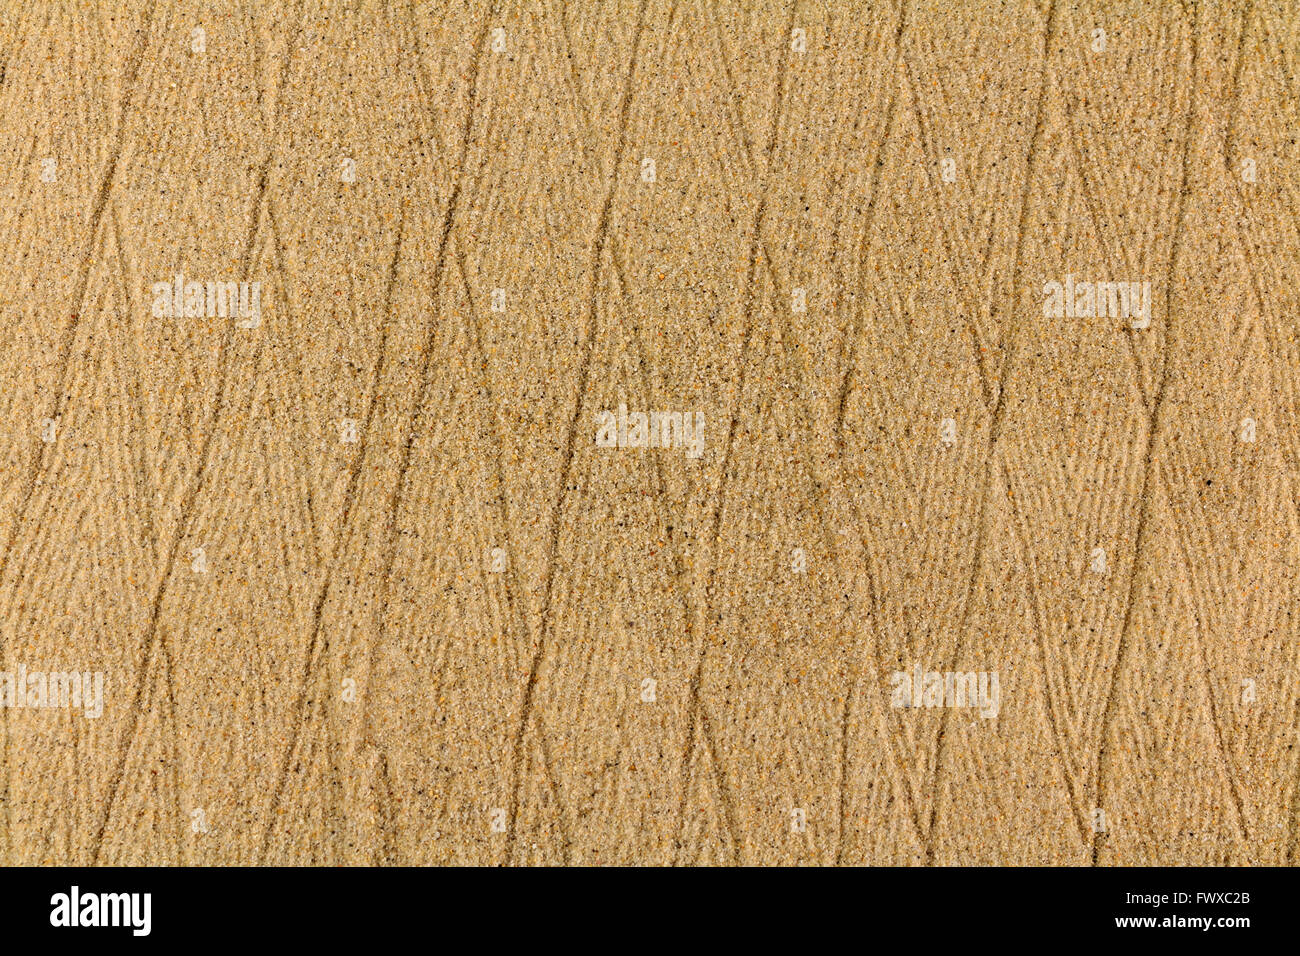 Macro of pattern in dry sand Stock Photo